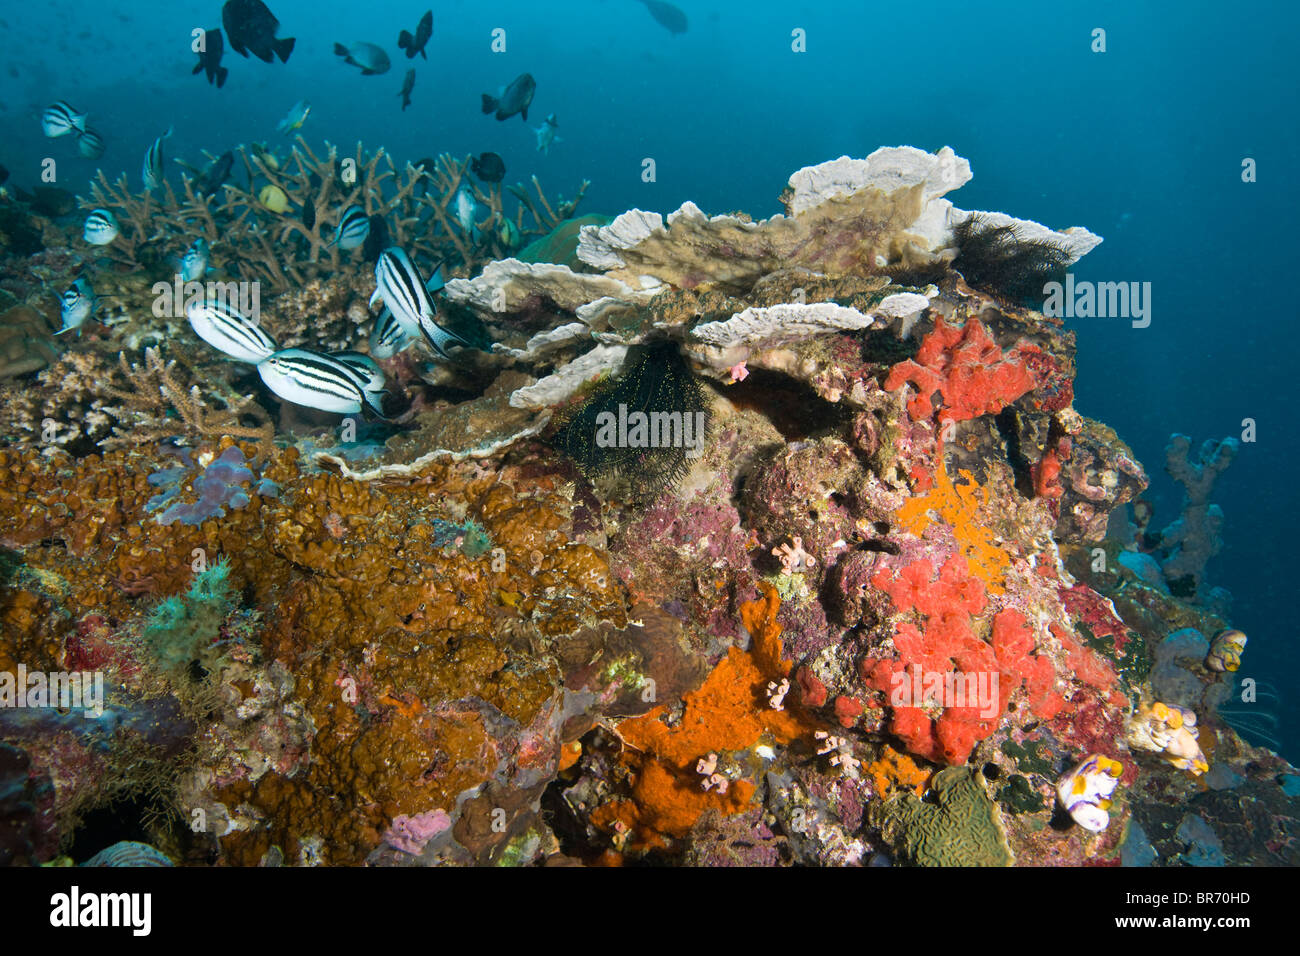 Healthy reef system with fish, sponges and coral, Bev's Reef, Tufi, Papua New Guinea Stock Photo